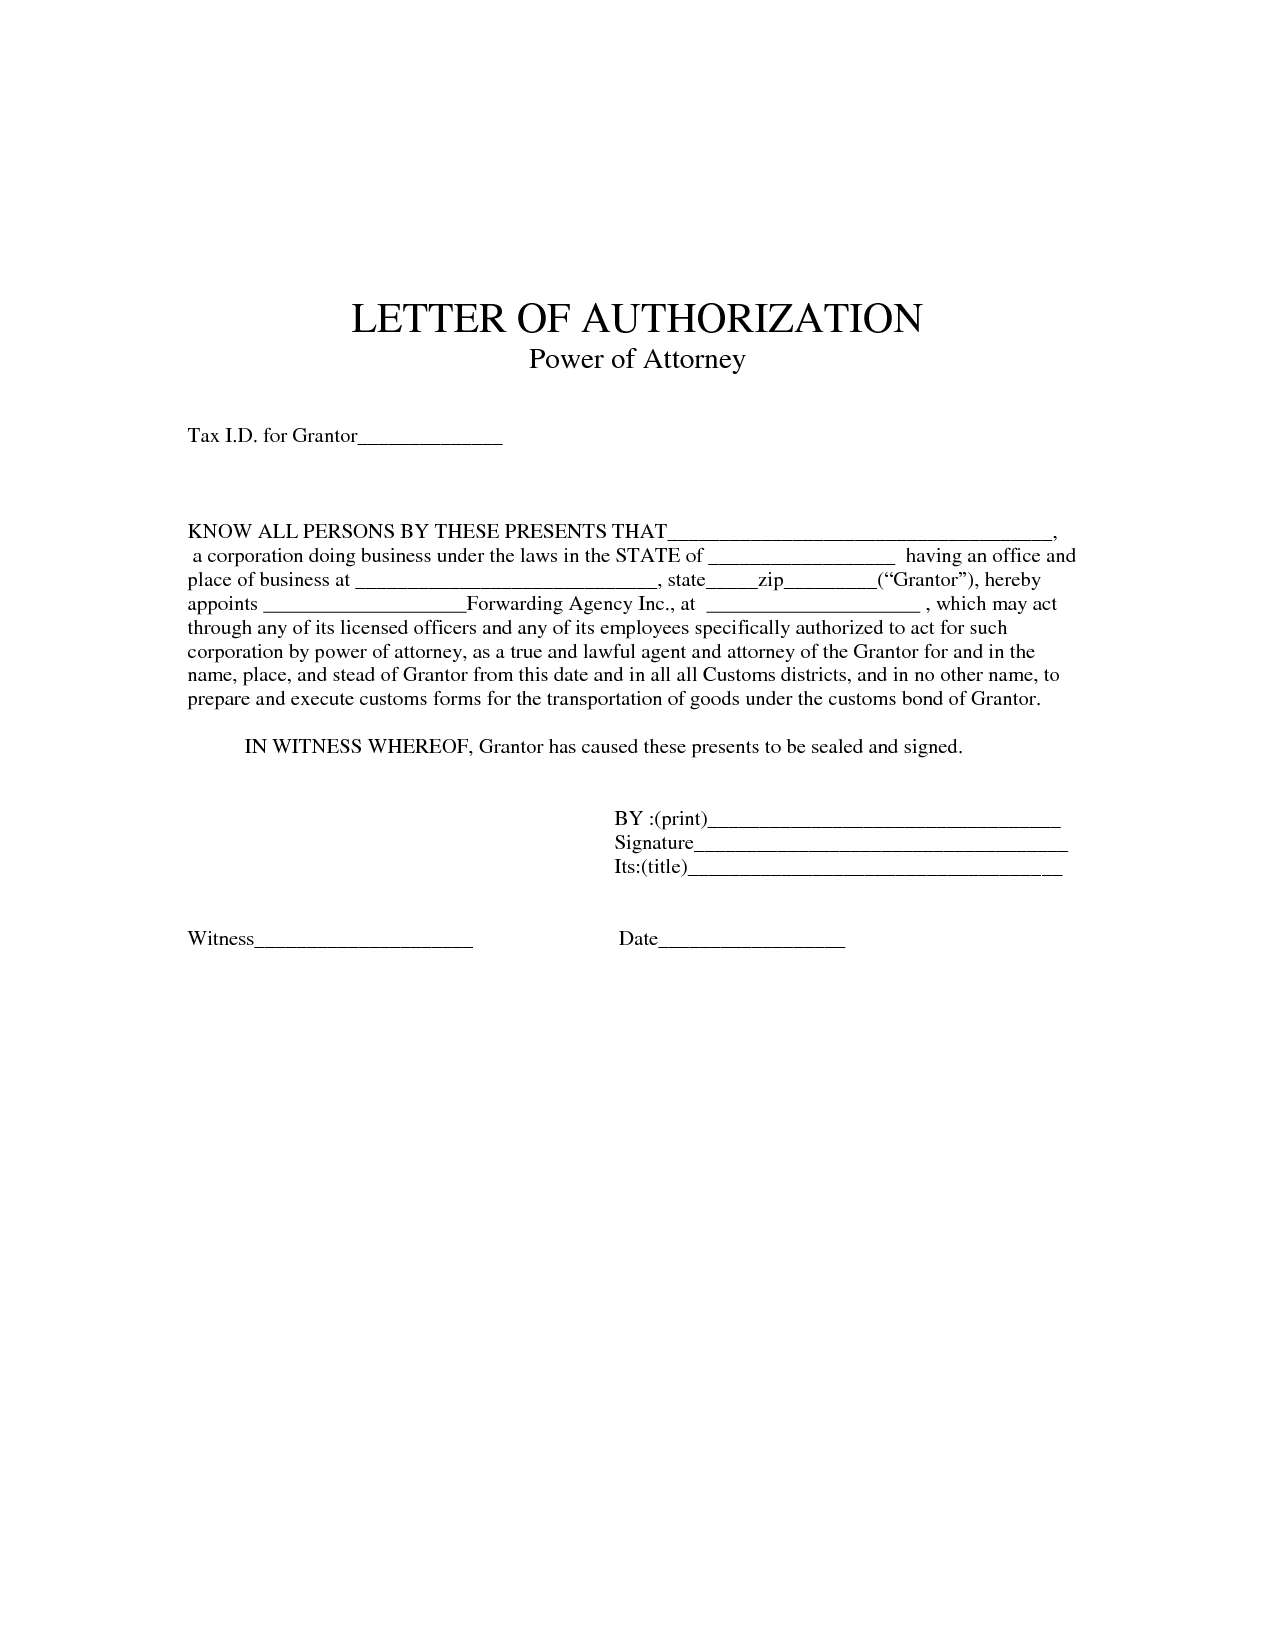 2+ Free Power of Authorization Letter Sample & Examples